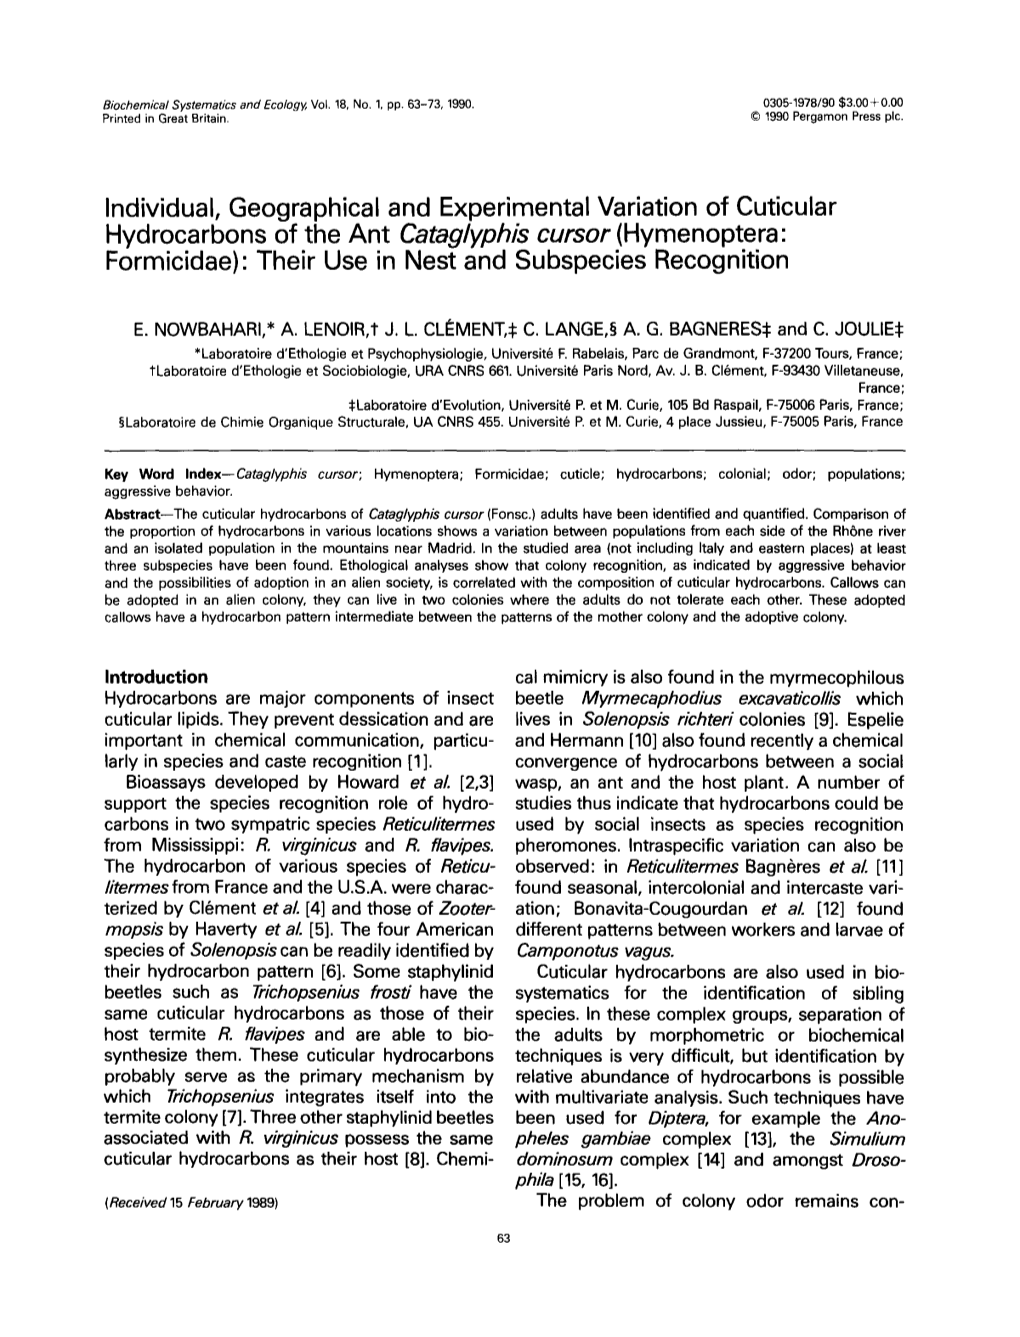 Individual, Geographical and Experimental Variation of Cuticular